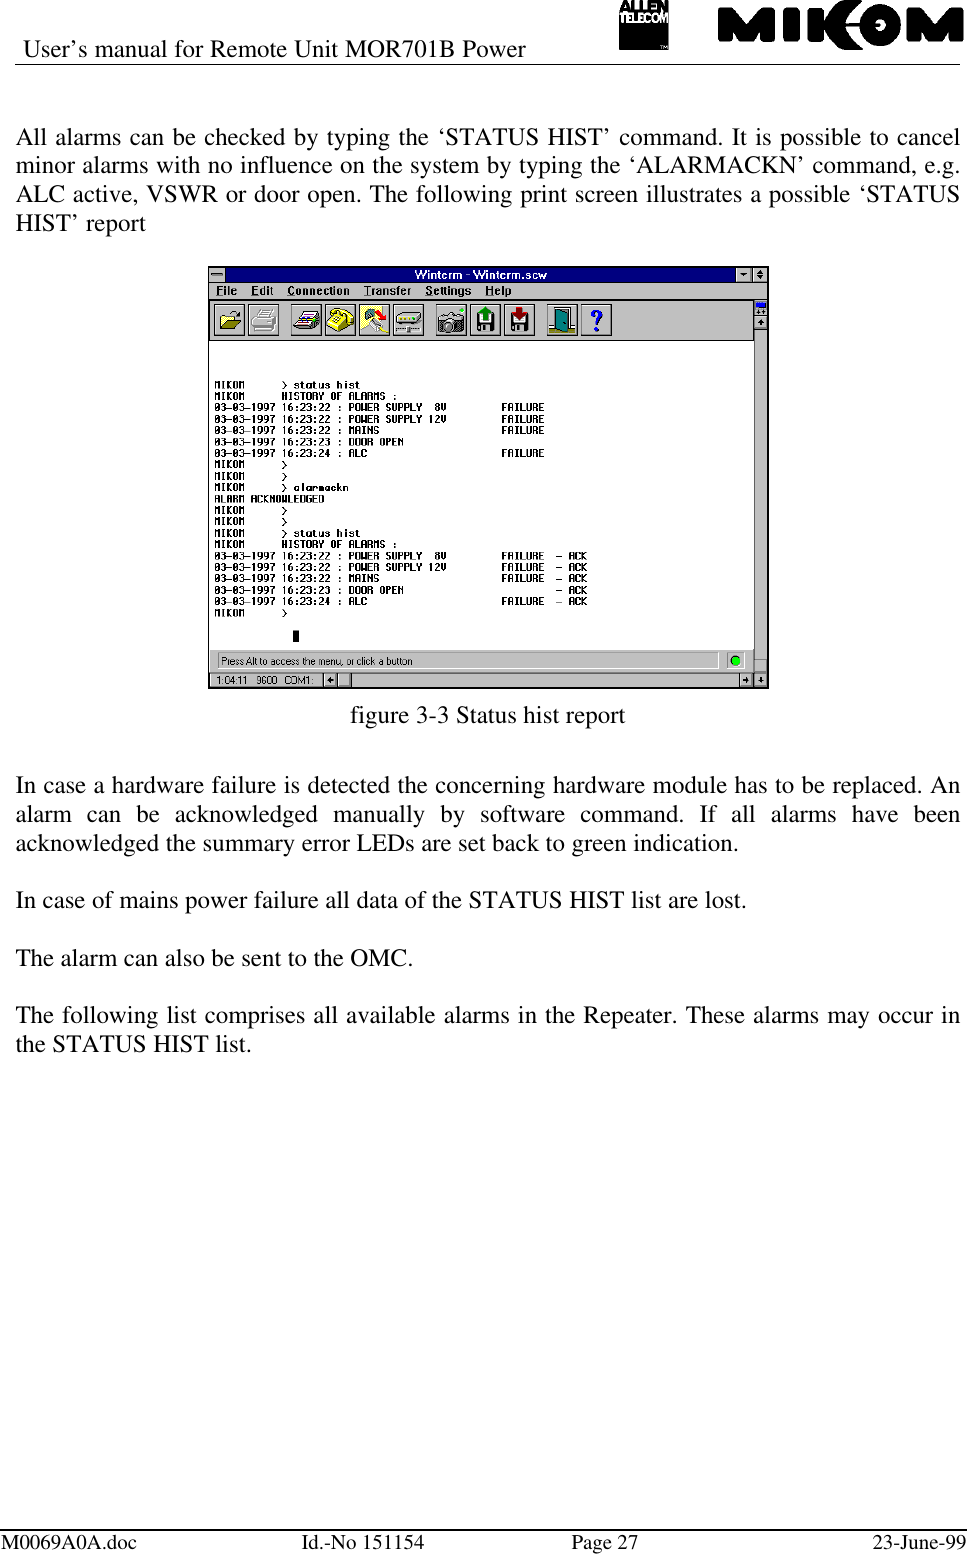 User’s manual for Remote Unit MOR701B PowerM0069A0A.doc Id.-No 151154 Page 27 23-June-99All alarms can be checked by typing the ‘STATUS HIST’ command. It is possible to cancelminor alarms with no influence on the system by typing the ‘ALARMACKN’ command, e.g.ALC active, VSWR or door open. The following print screen illustrates a possible ‘STATUSHIST’ reportfigure 3-3 Status hist reportIn case a hardware failure is detected the concerning hardware module has to be replaced. Analarm can be acknowledged manually by software command. If all alarms have beenacknowledged the summary error LEDs are set back to green indication.In case of mains power failure all data of the STATUS HIST list are lost.The alarm can also be sent to the OMC.The following list comprises all available alarms in the Repeater. These alarms may occur inthe STATUS HIST list.